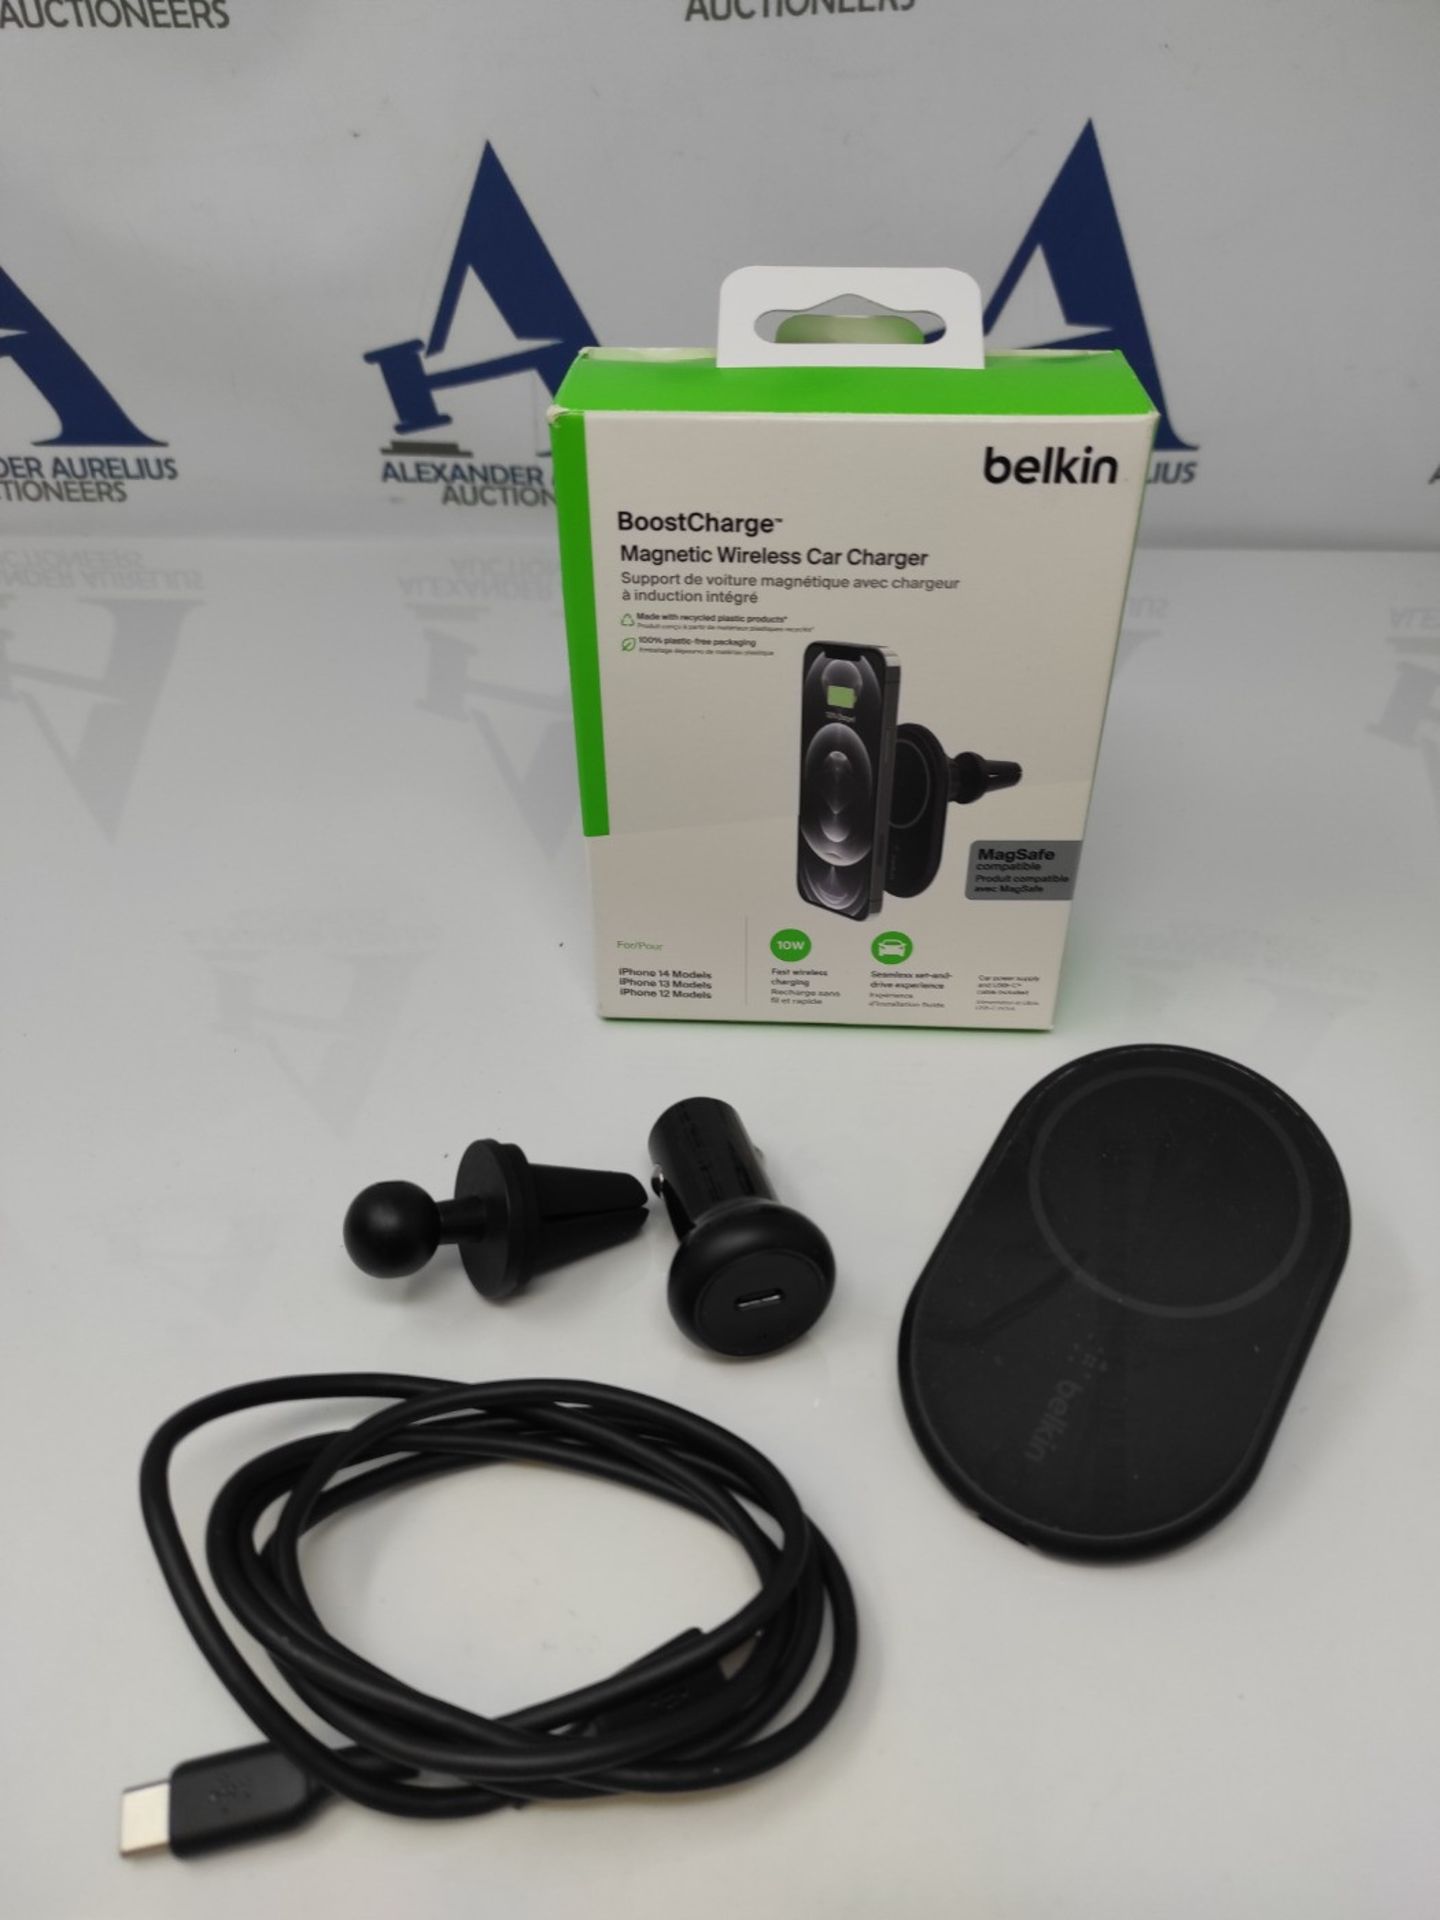 Belkin BoostCharge Wireless Charger, Magnetic Car Charger, Phone Mount Holder Compatib - Image 2 of 2